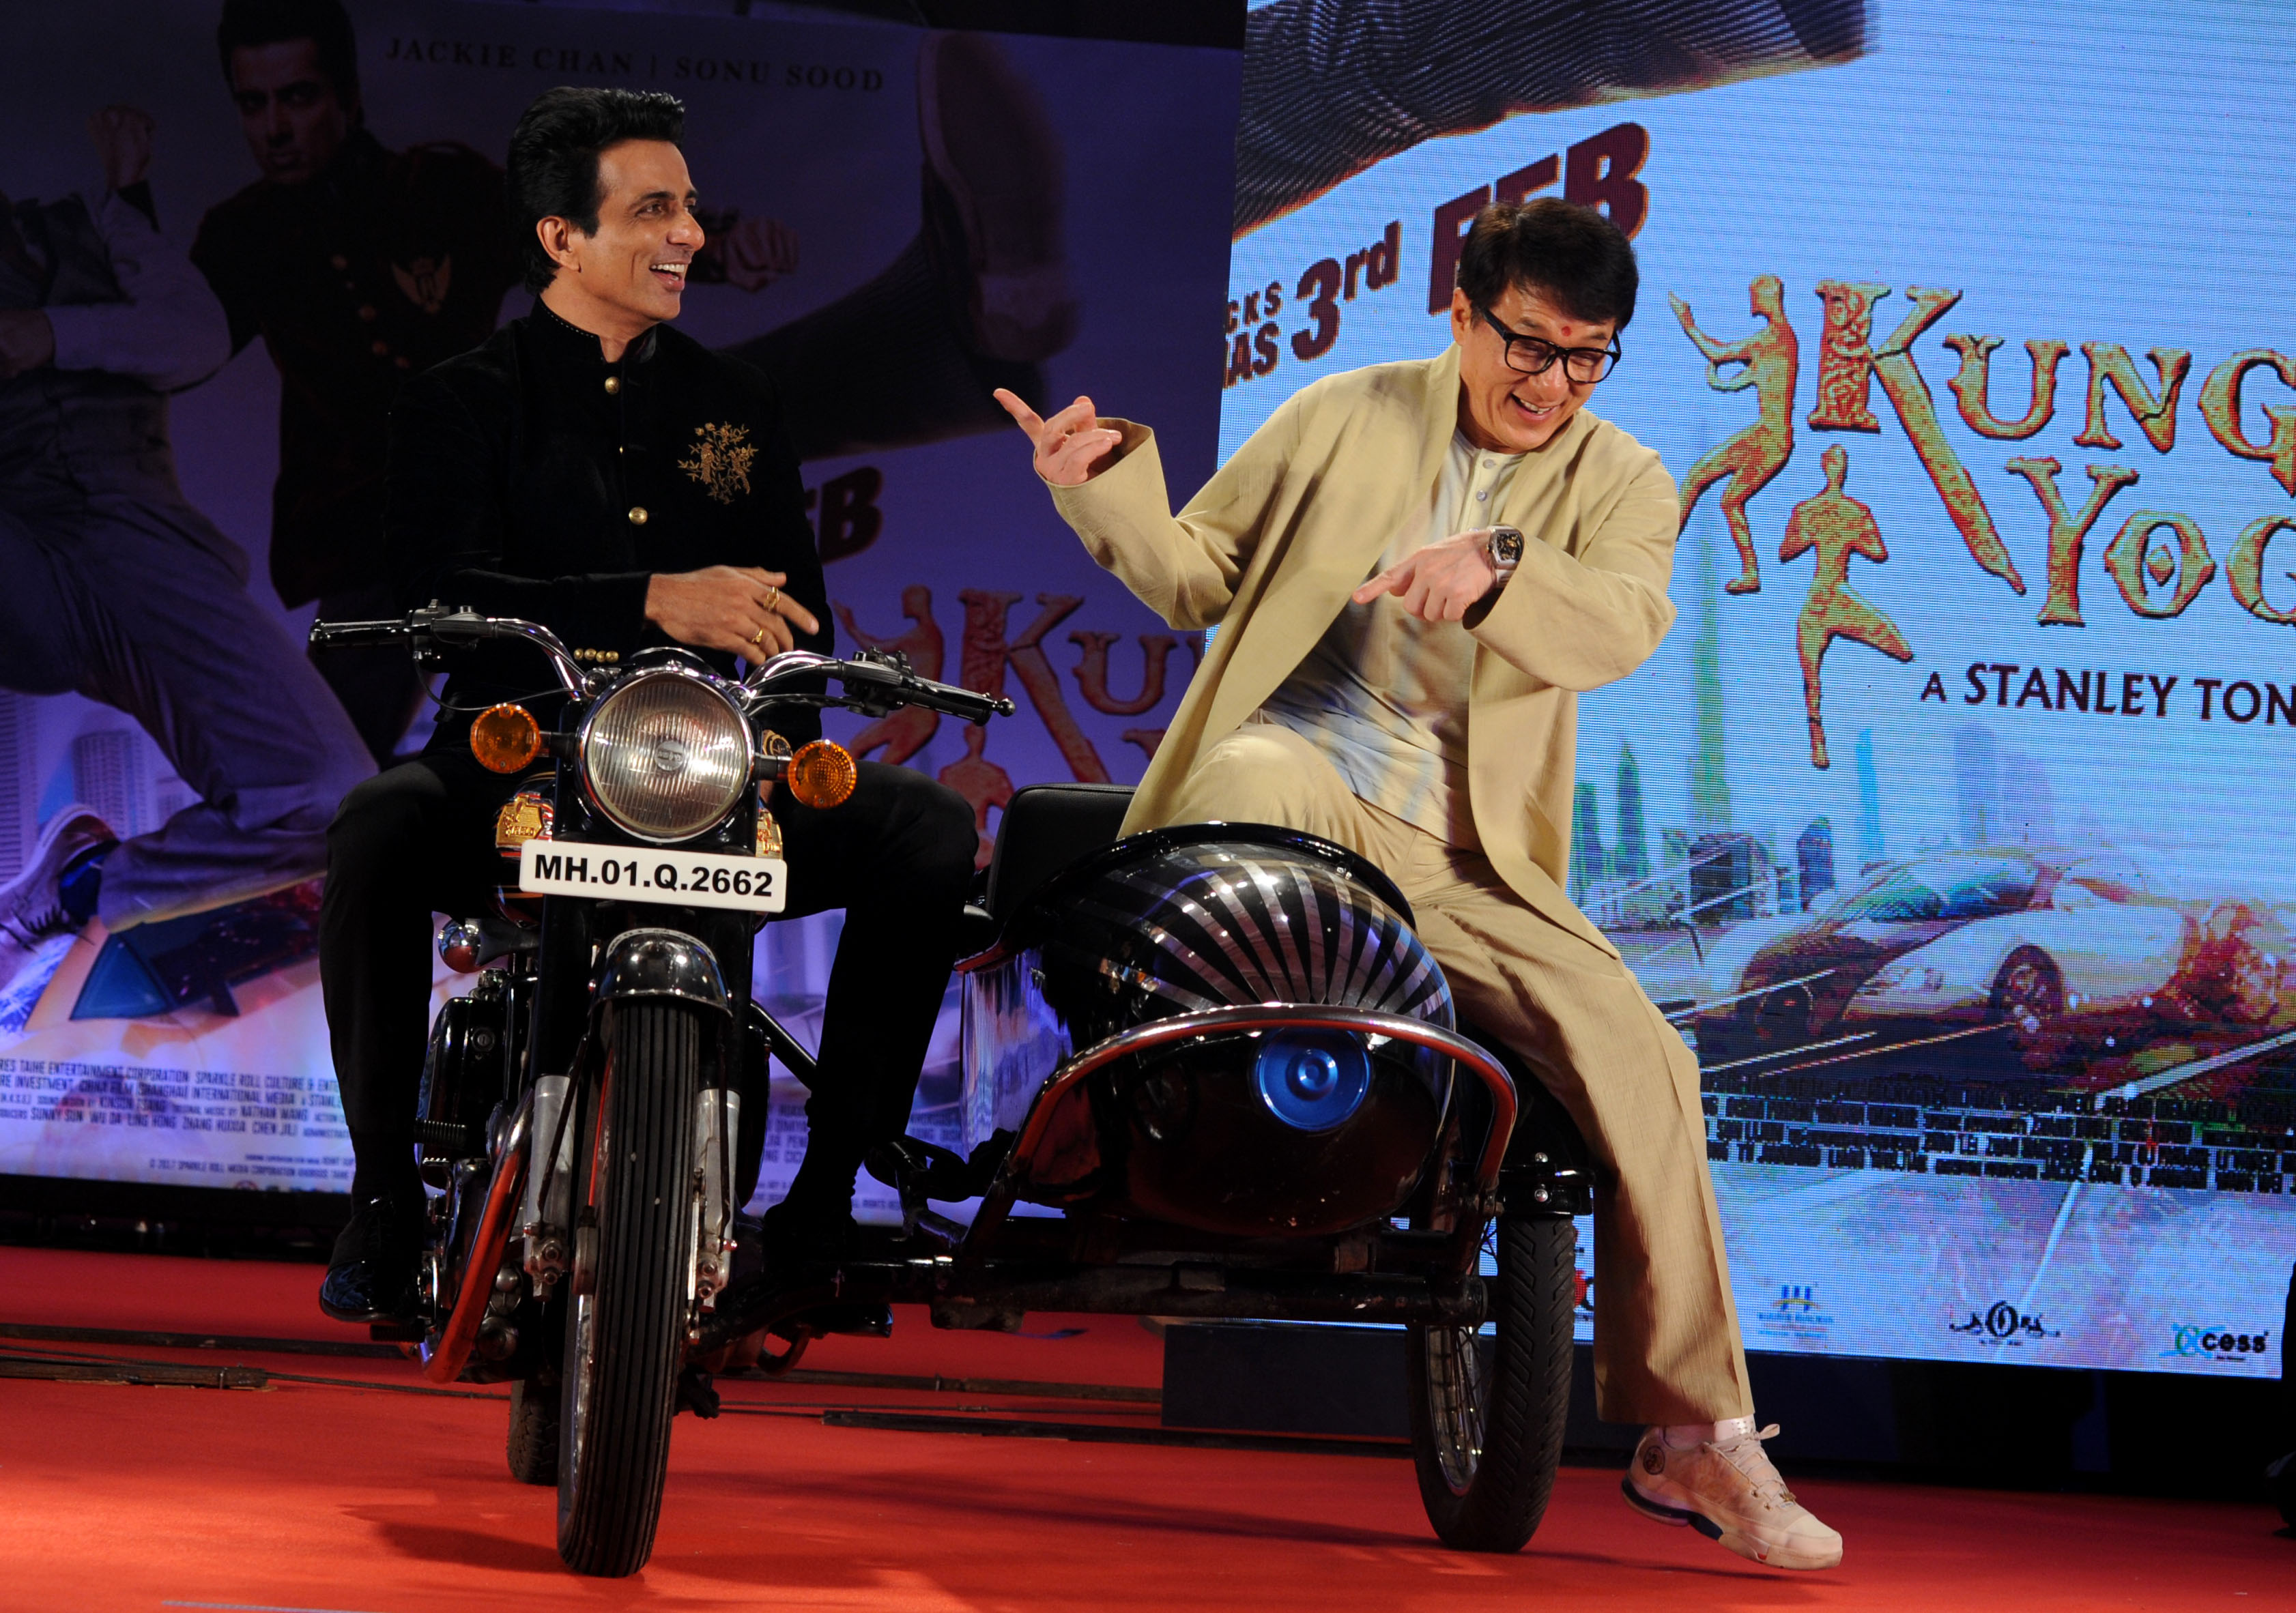 Hong Kong action movie star Jackie Chan (R) and Indian Bollywood actor Sonu Sood attend a promotional event for the upcoming film "Kung Fu Yoga" in Mumbai on January 23, 2017.  / AFP PHOTO / -